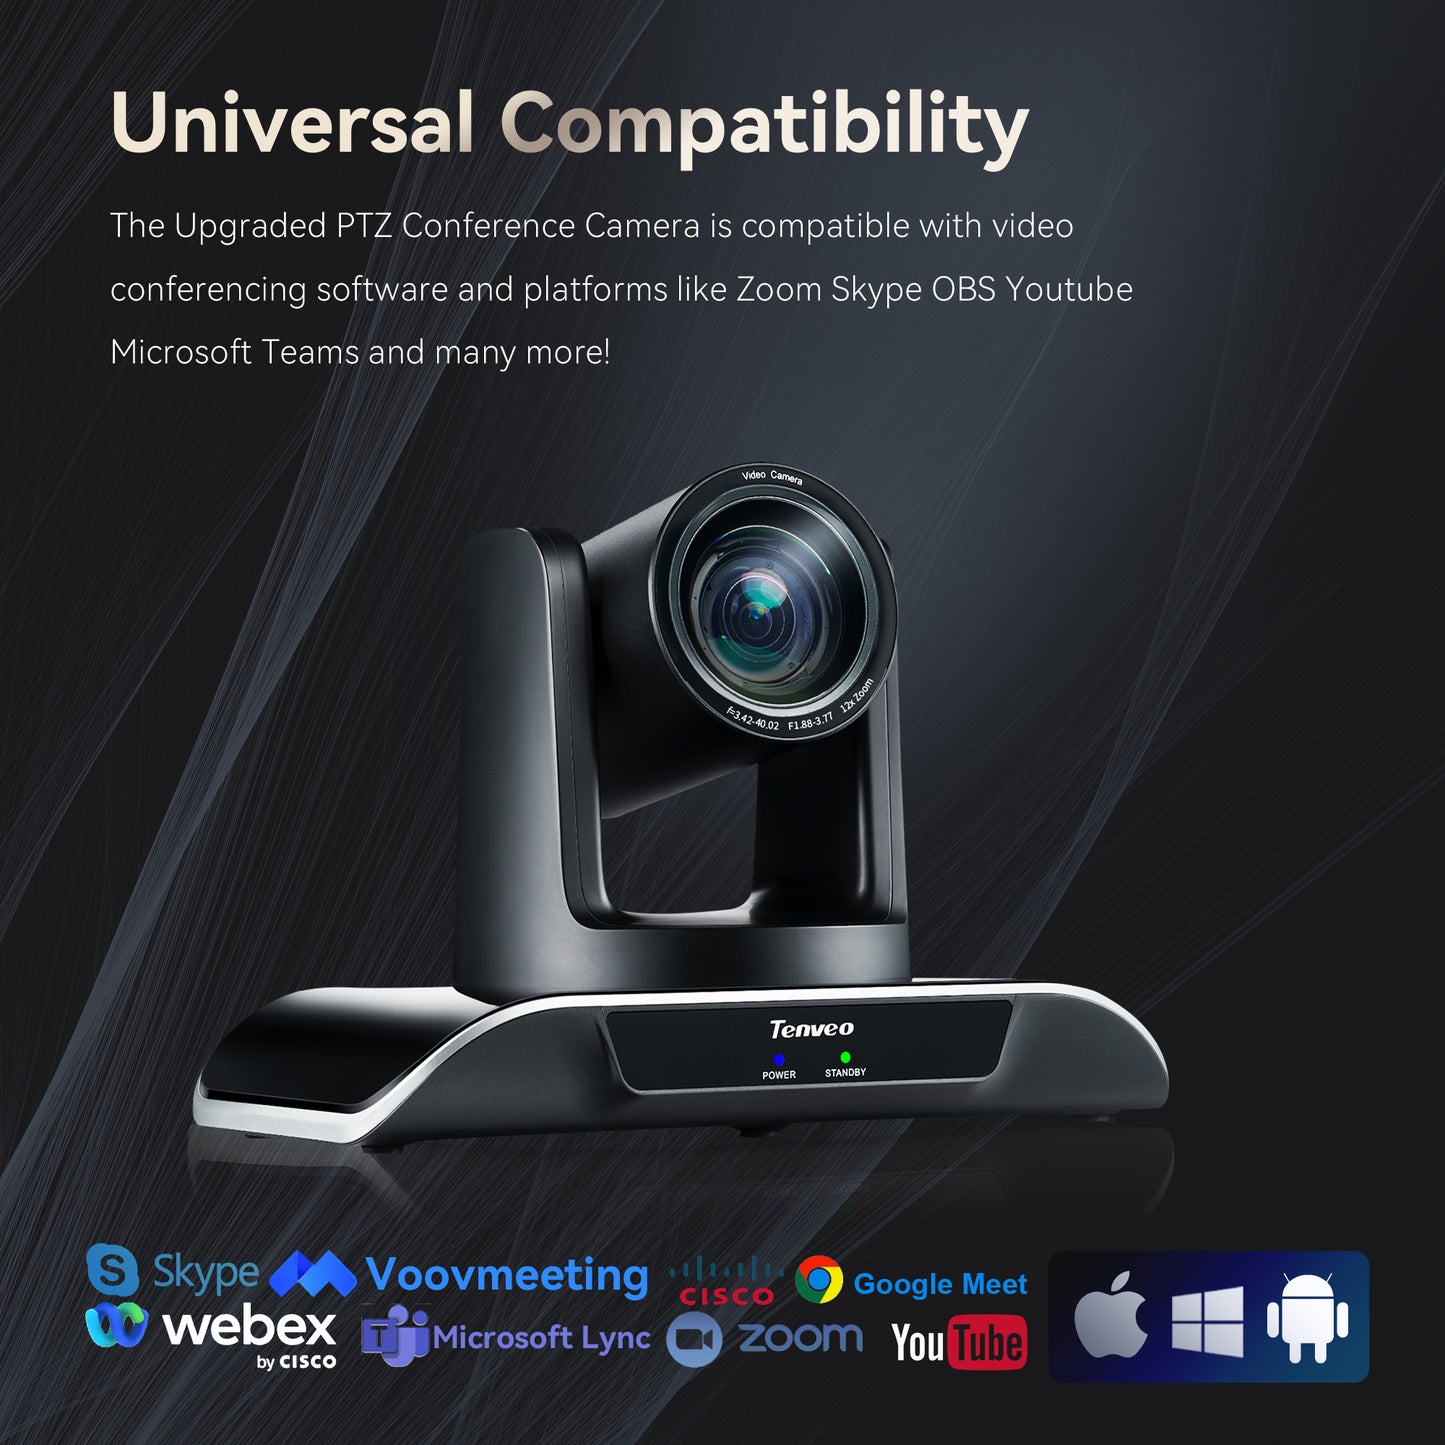 Tenveo Tevo 12X Zoom 8MP 4K Ultra HD PTZ Video Conference Camera - USB 3.0 / HDMI / RS232 / RS485 with IR Remote Control for Business Meeting, Events, Church, Online, Education, and Training Video Recording | VHDPRO12U-4K